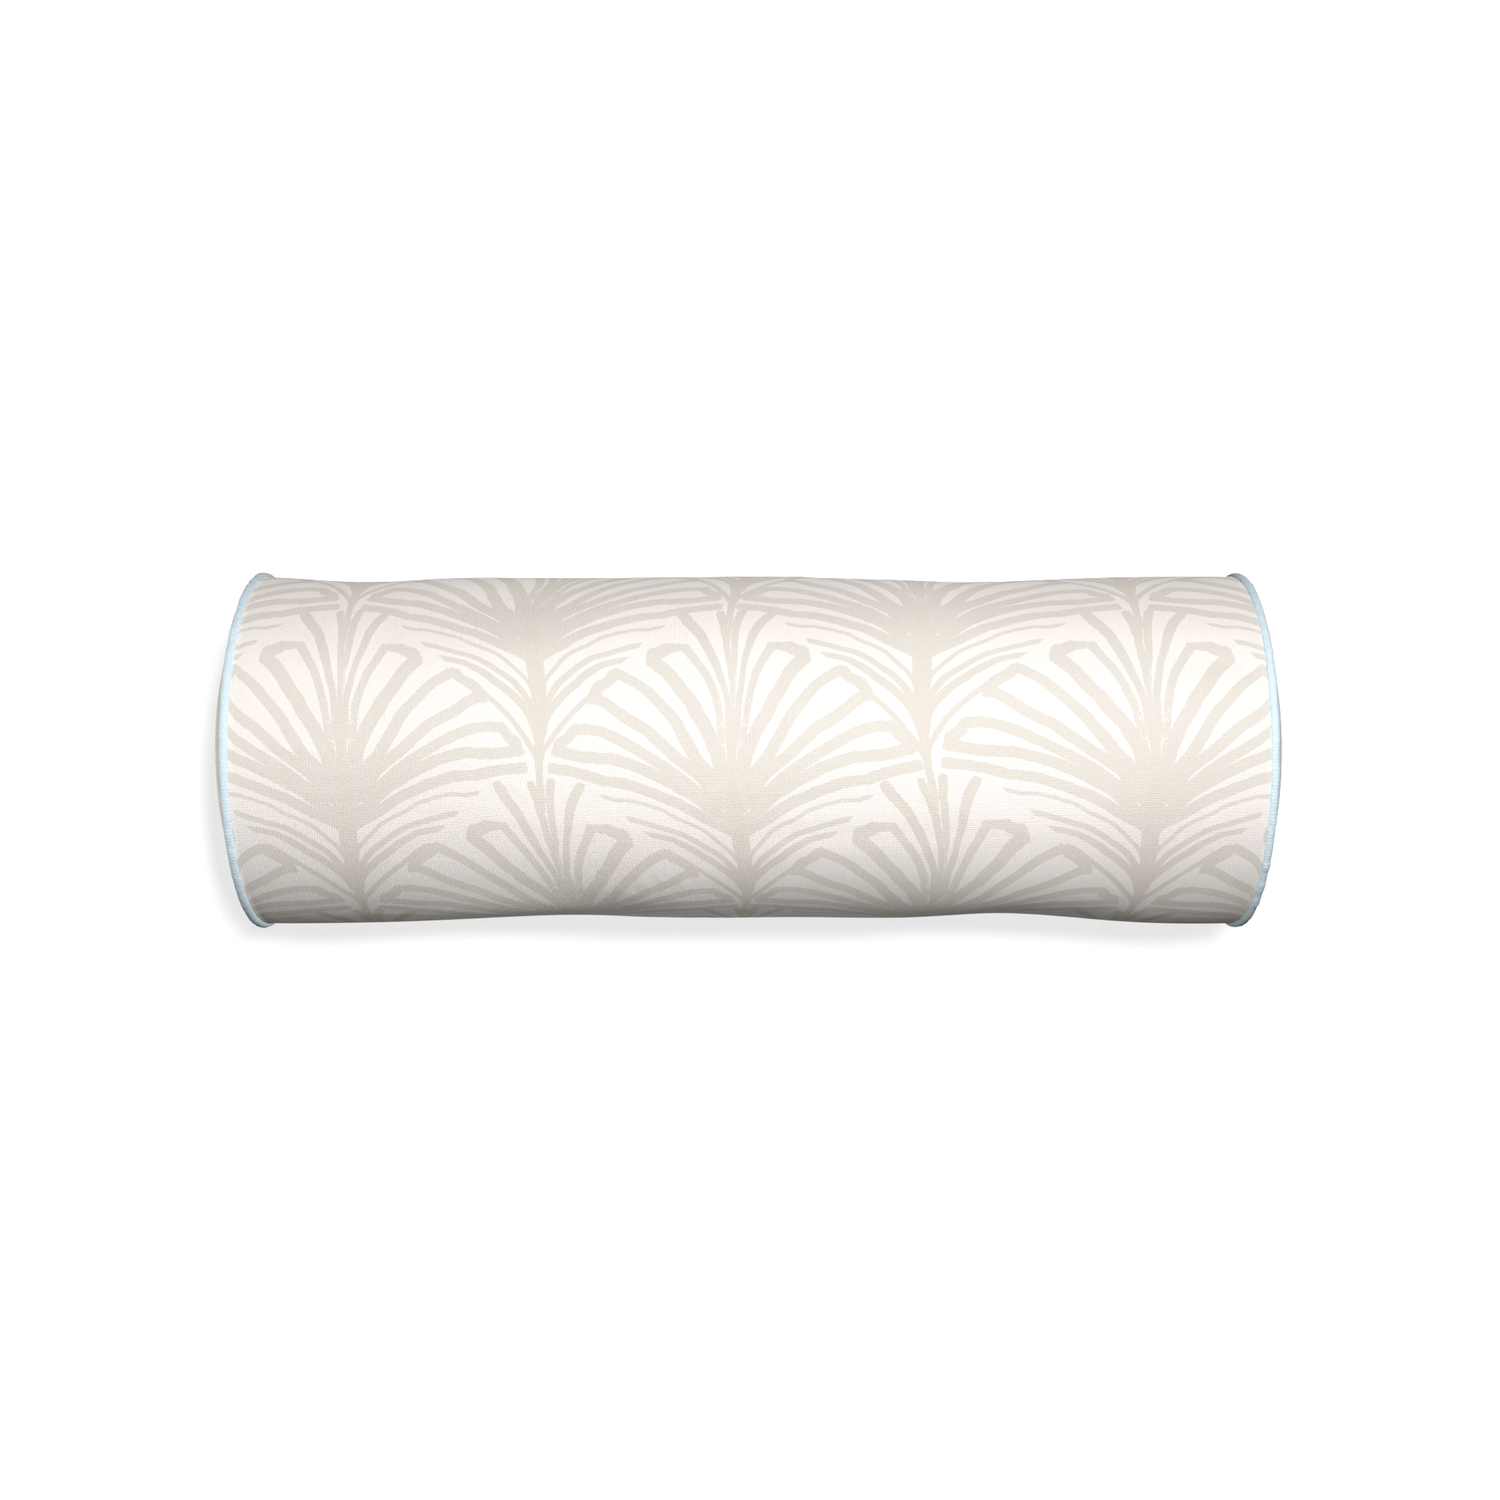 Bolster suzy sand custom beige palmpillow with powder piping on white background